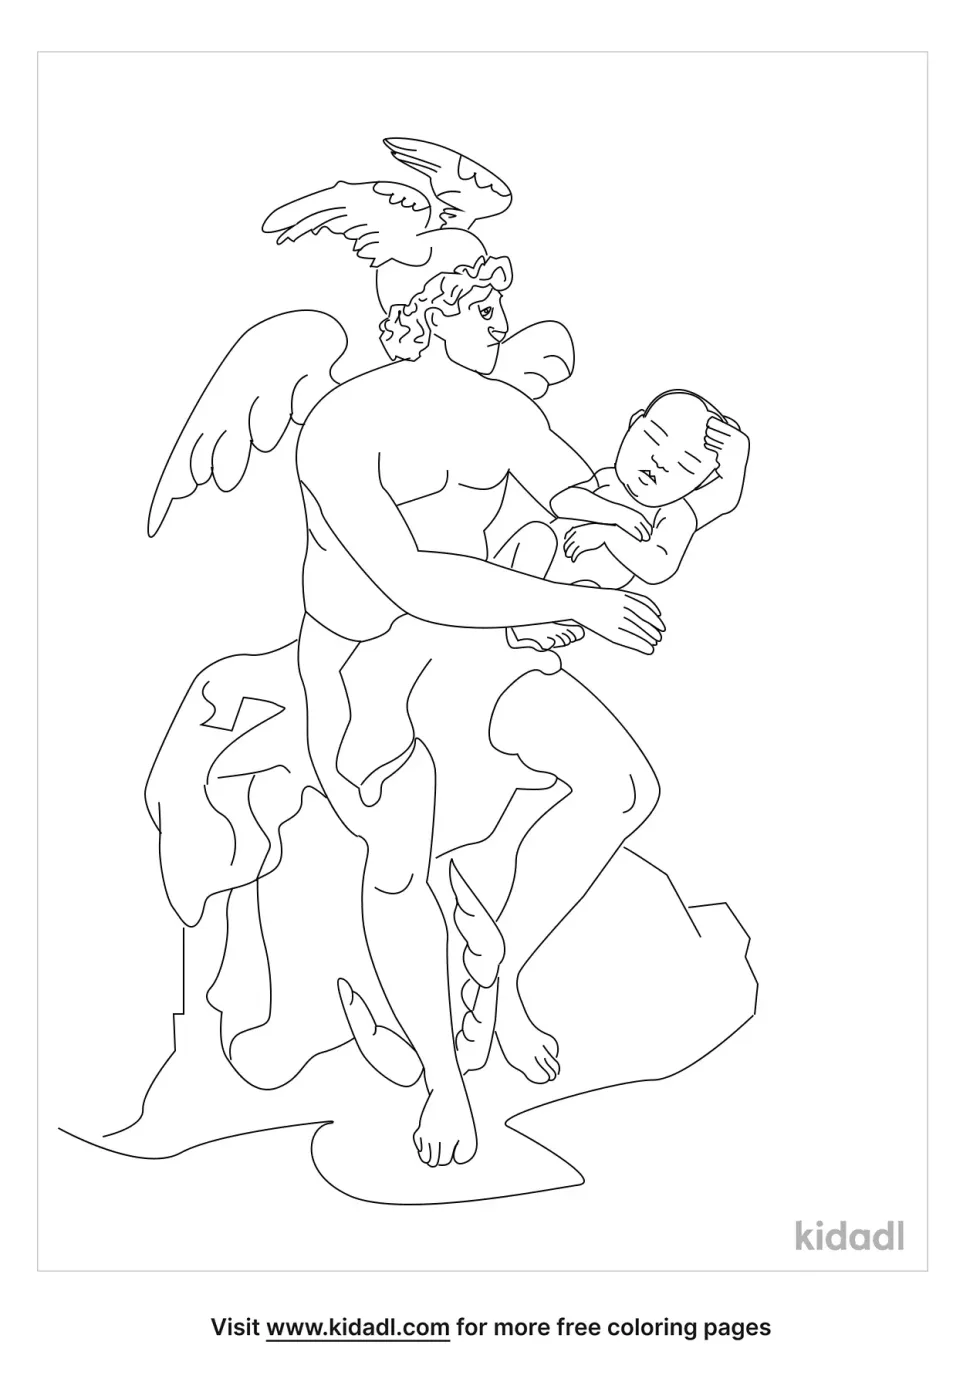 Hermes And Infant Dionysus Coloring Page